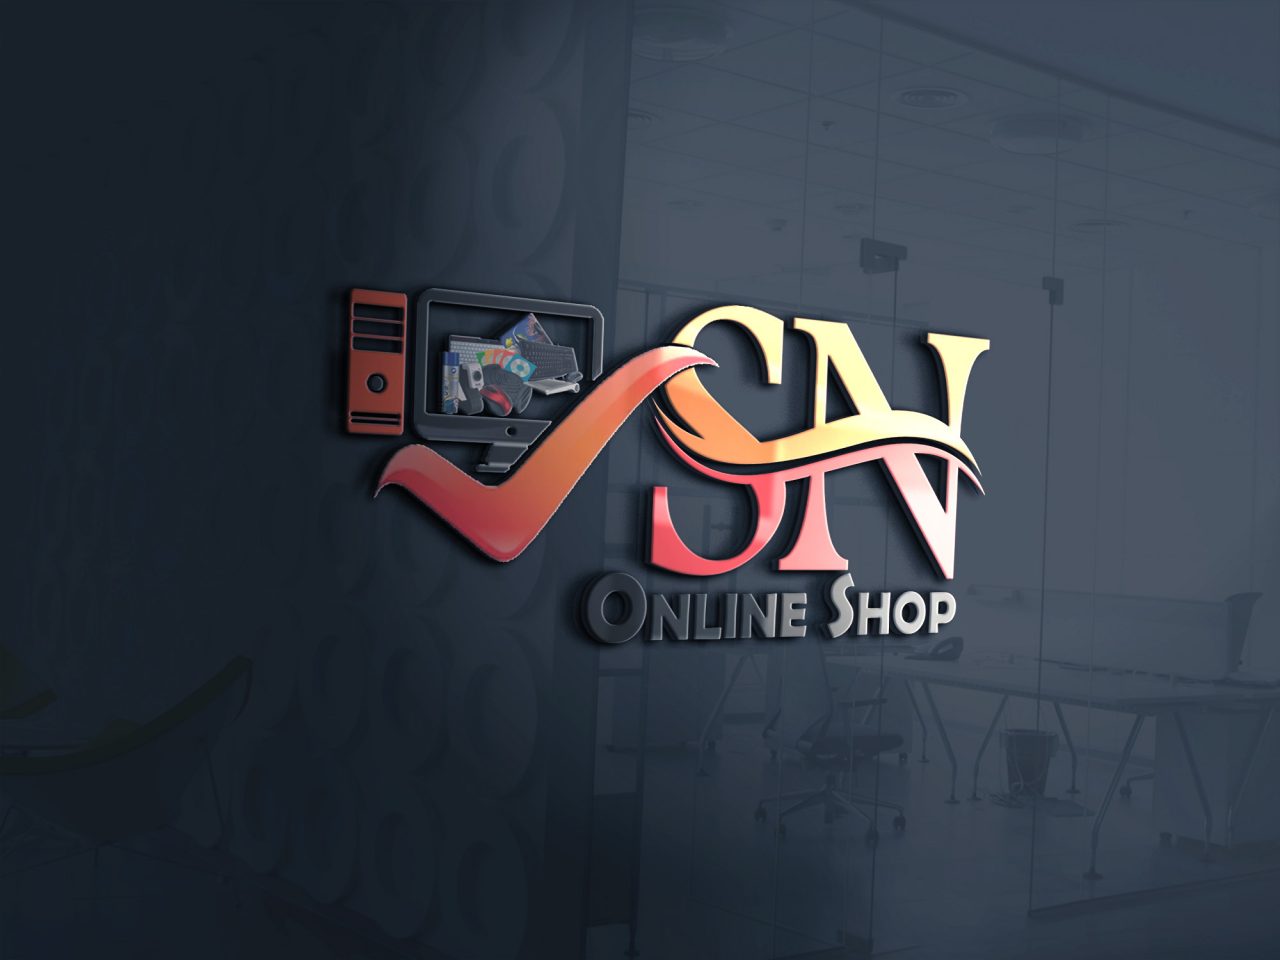 Logo Design Services for Ecommerce Store